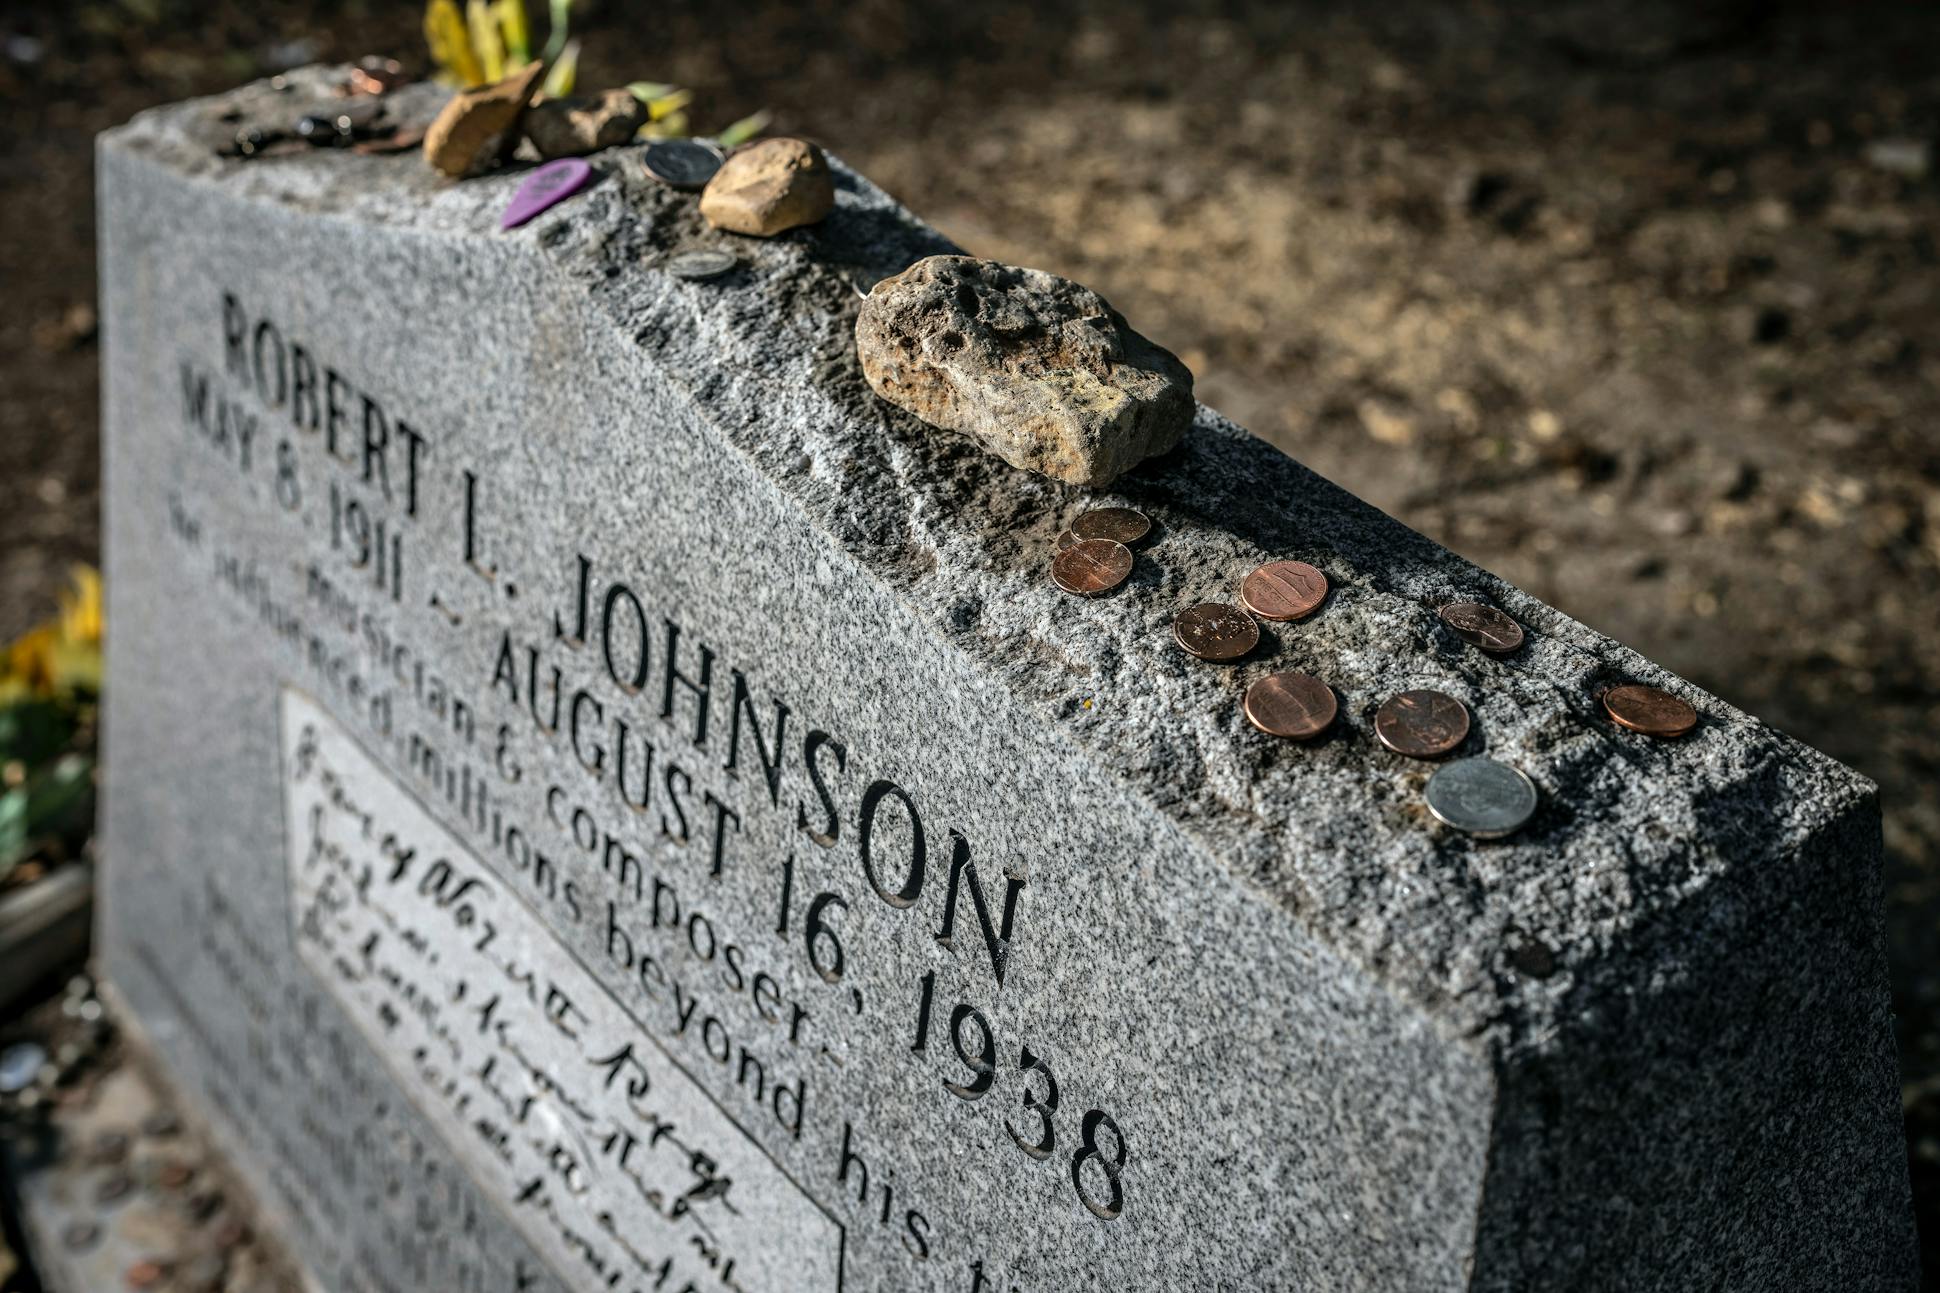 Blues fans make the pilgrimage to Robert Johnson's grave in Greenwood, leaving coins, guitar picks and other mementos.